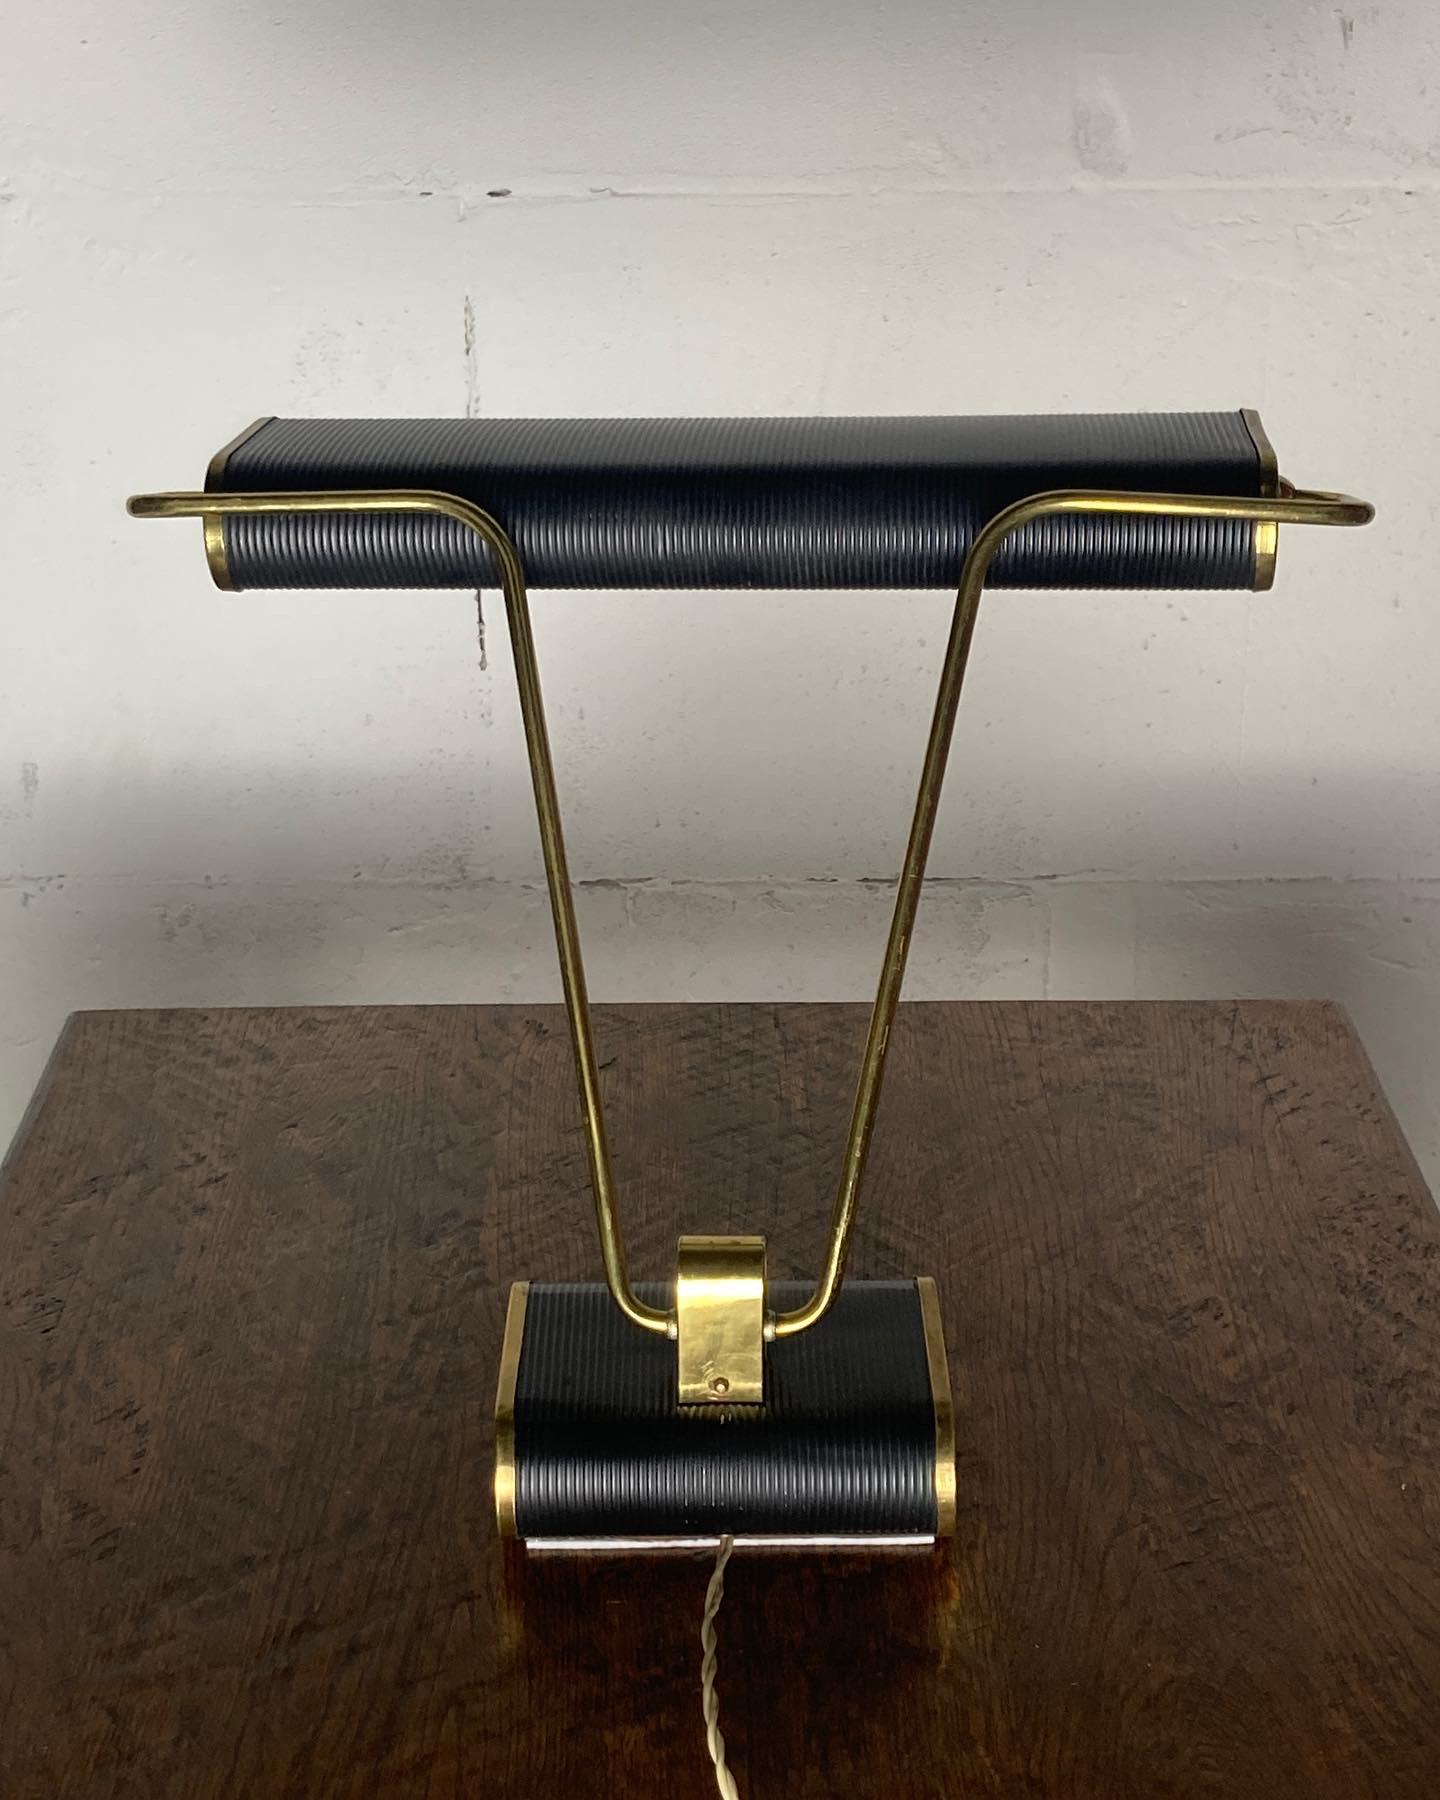 20th Century Black and brass gold desk lamp model N71 by Eileen Gray for Jumo, France 1940s